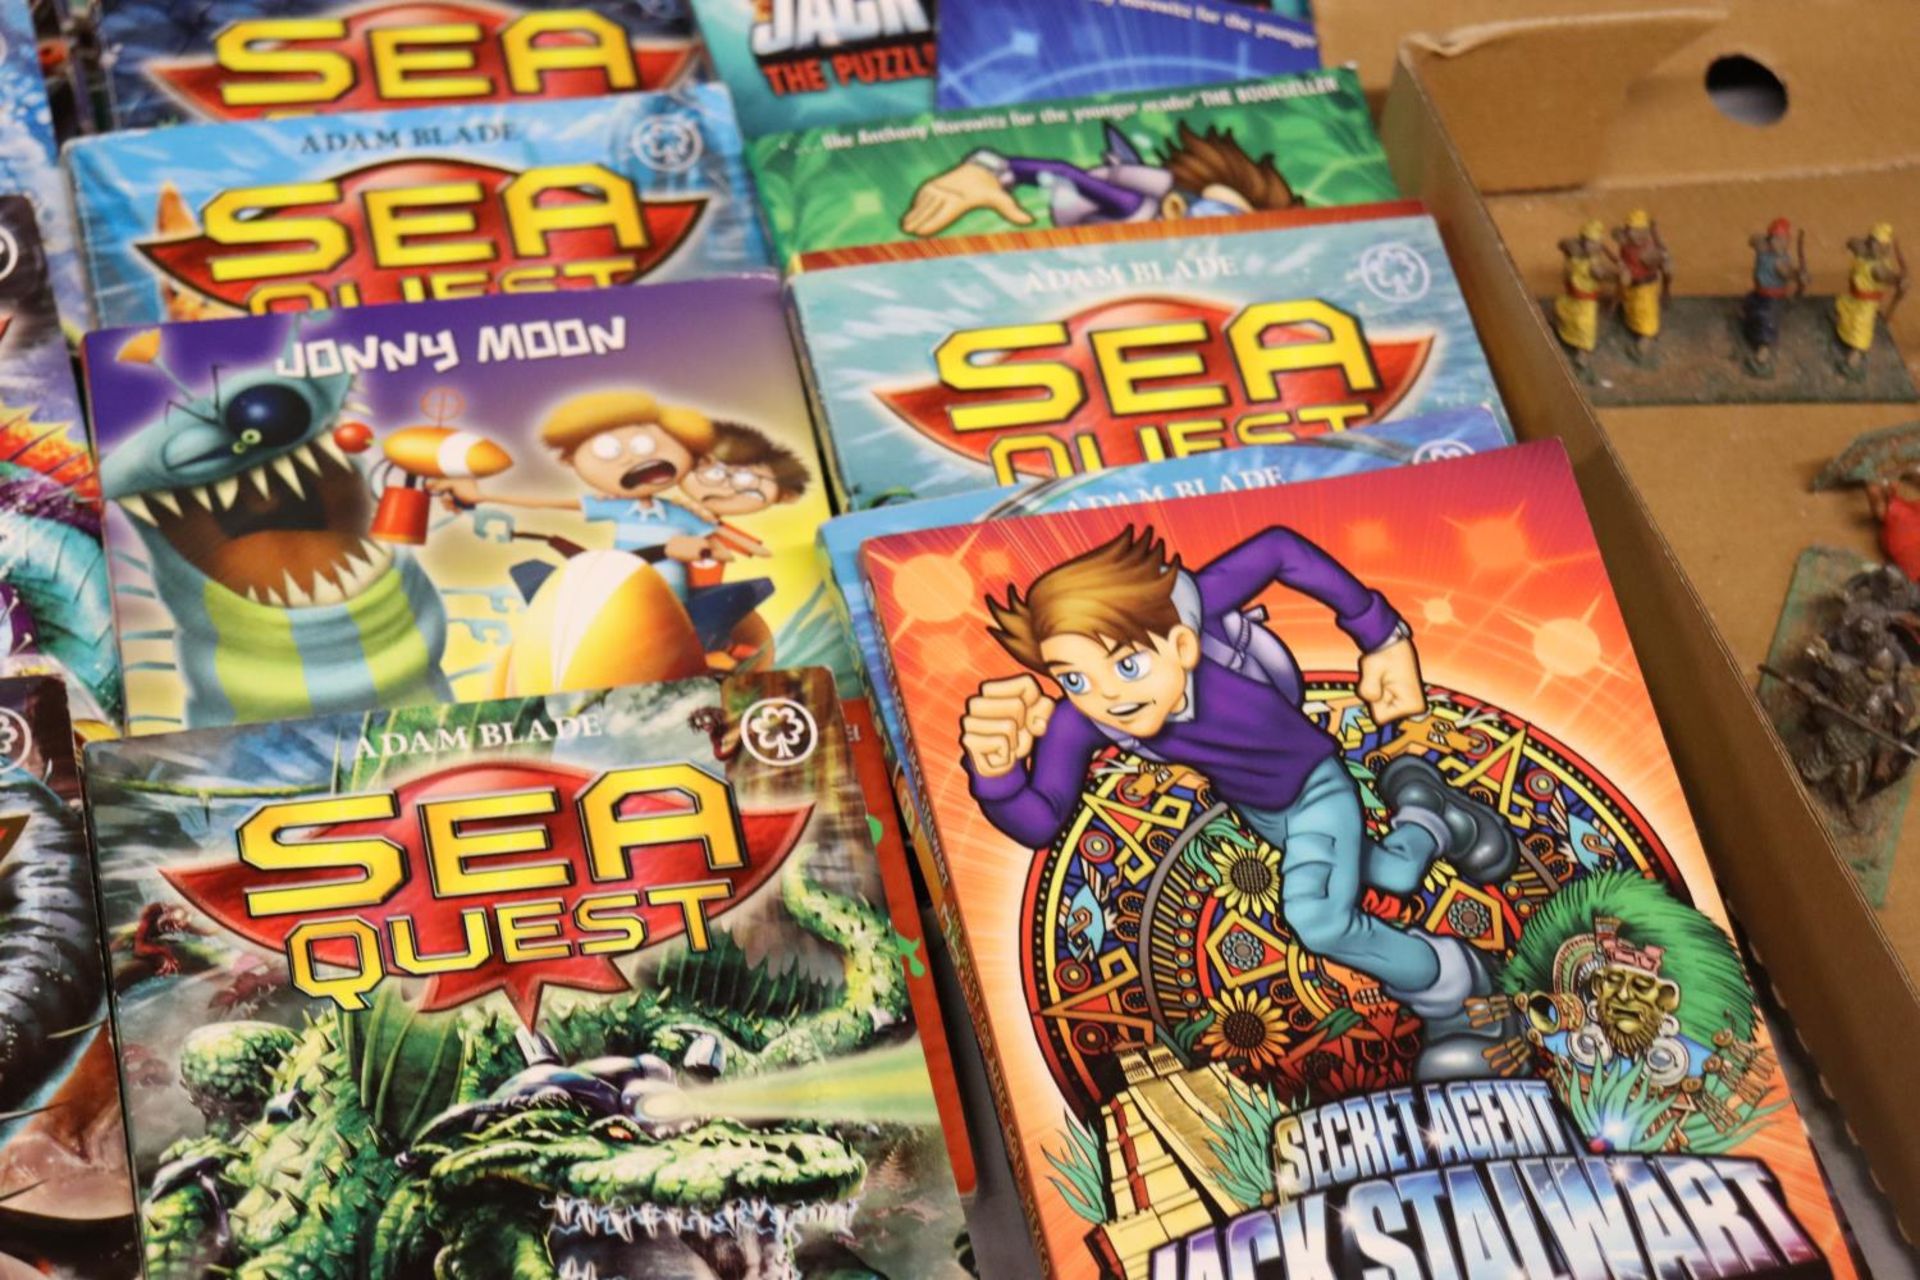 A LARGE COLLECTION OF CHILDREN'S BOOKS TO INCLUDE 'SEA QUEST' BY ADAM BLADE AND SECRET AGENT JACK - Image 5 of 5